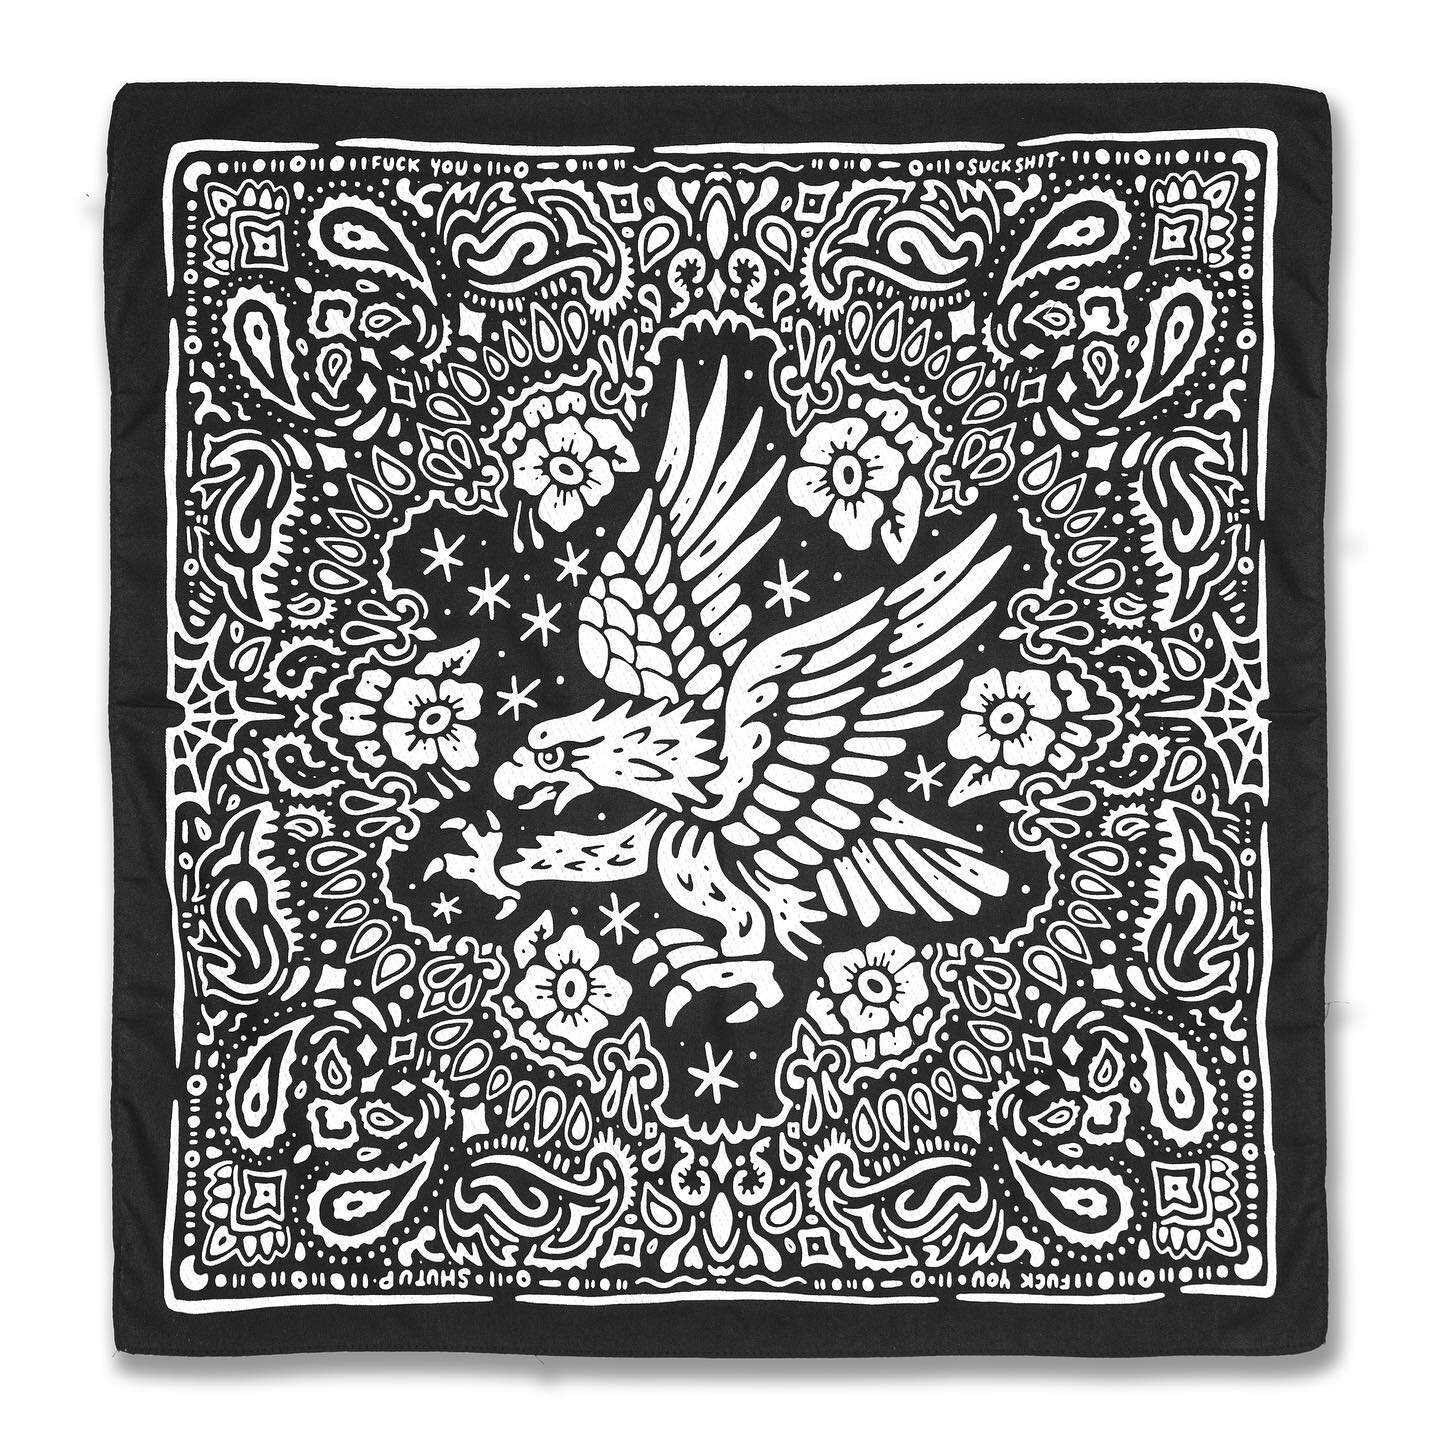 New SCREAMING EAGLE bandanas added to my webstore. Handprinted 55cm classic cotton doo-rag. Ready to cover your hideous faces and hang from your empty pockets.
-
www.sindysinn.com.au
#sindysinn #bandana #covidmask #screamingeagle